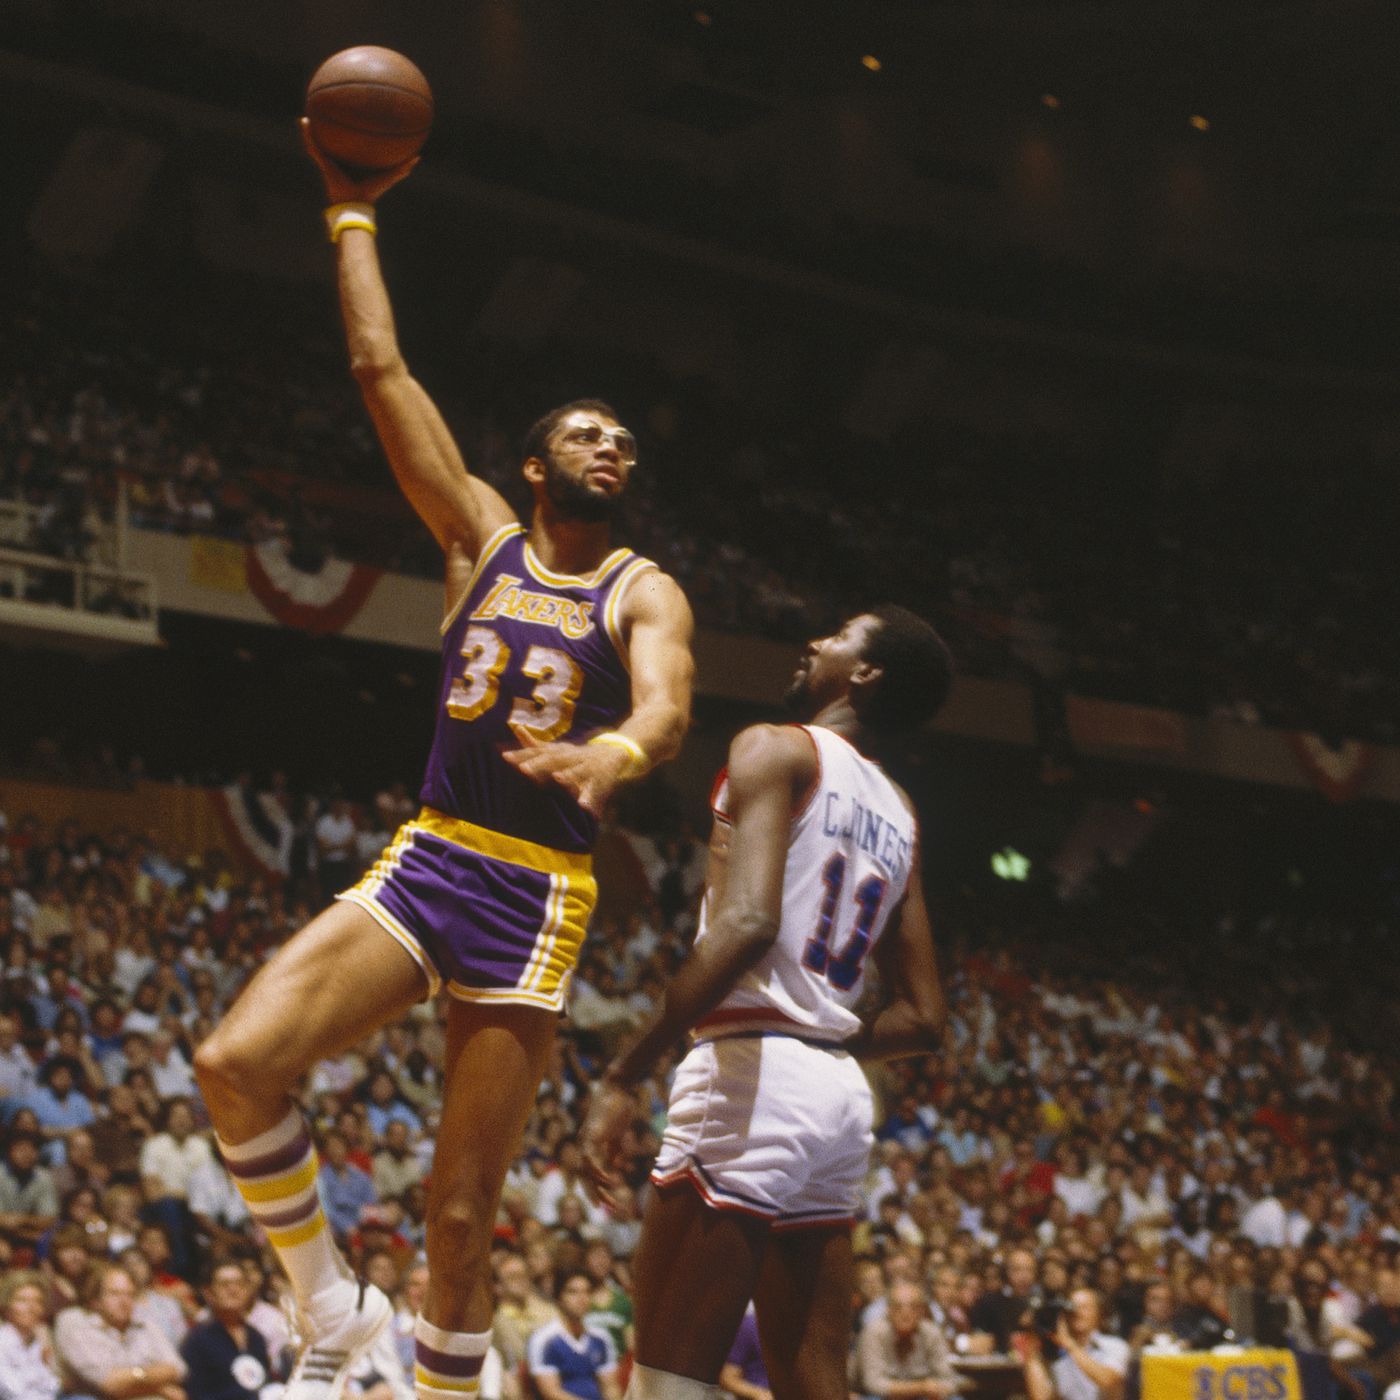 This era of Lakers was known for dynamic fast passes, showmanship, and controversy? Ex. Magic, Kareem